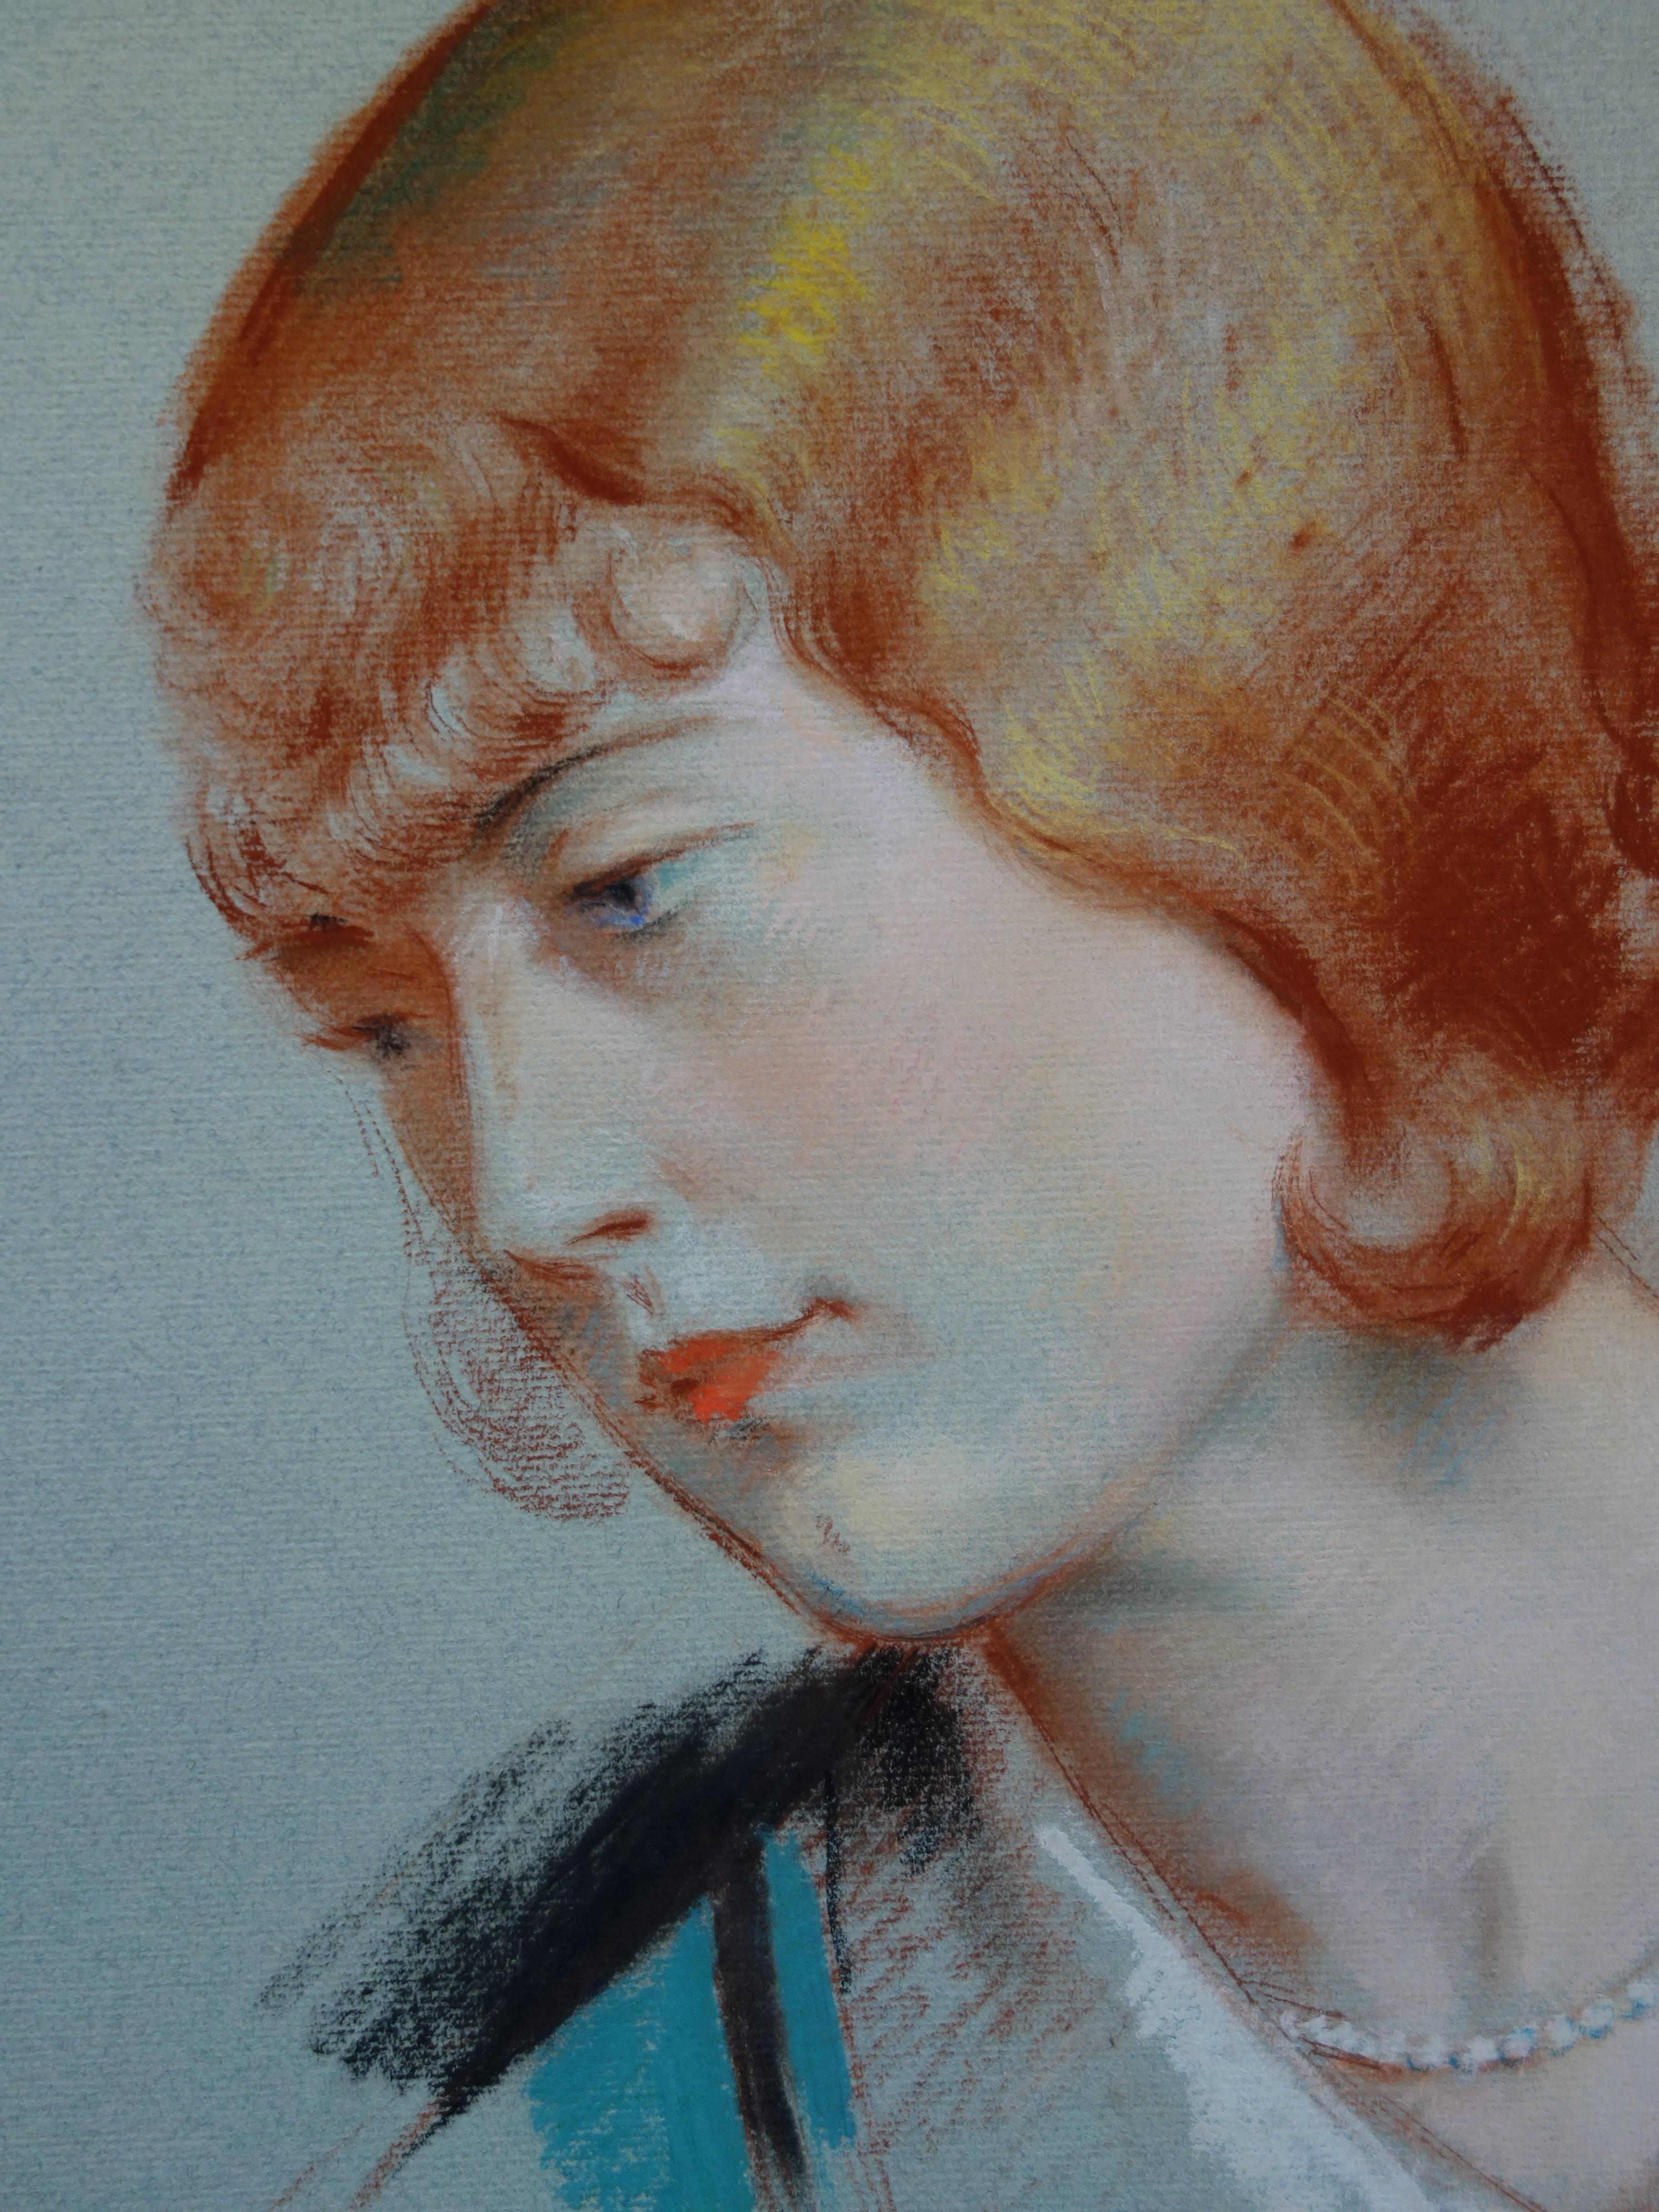 Red Hair Thinking Woman - Original Signed Charcoals Drawing - 1929 - Gray Portrait by Gustave Poetzsch